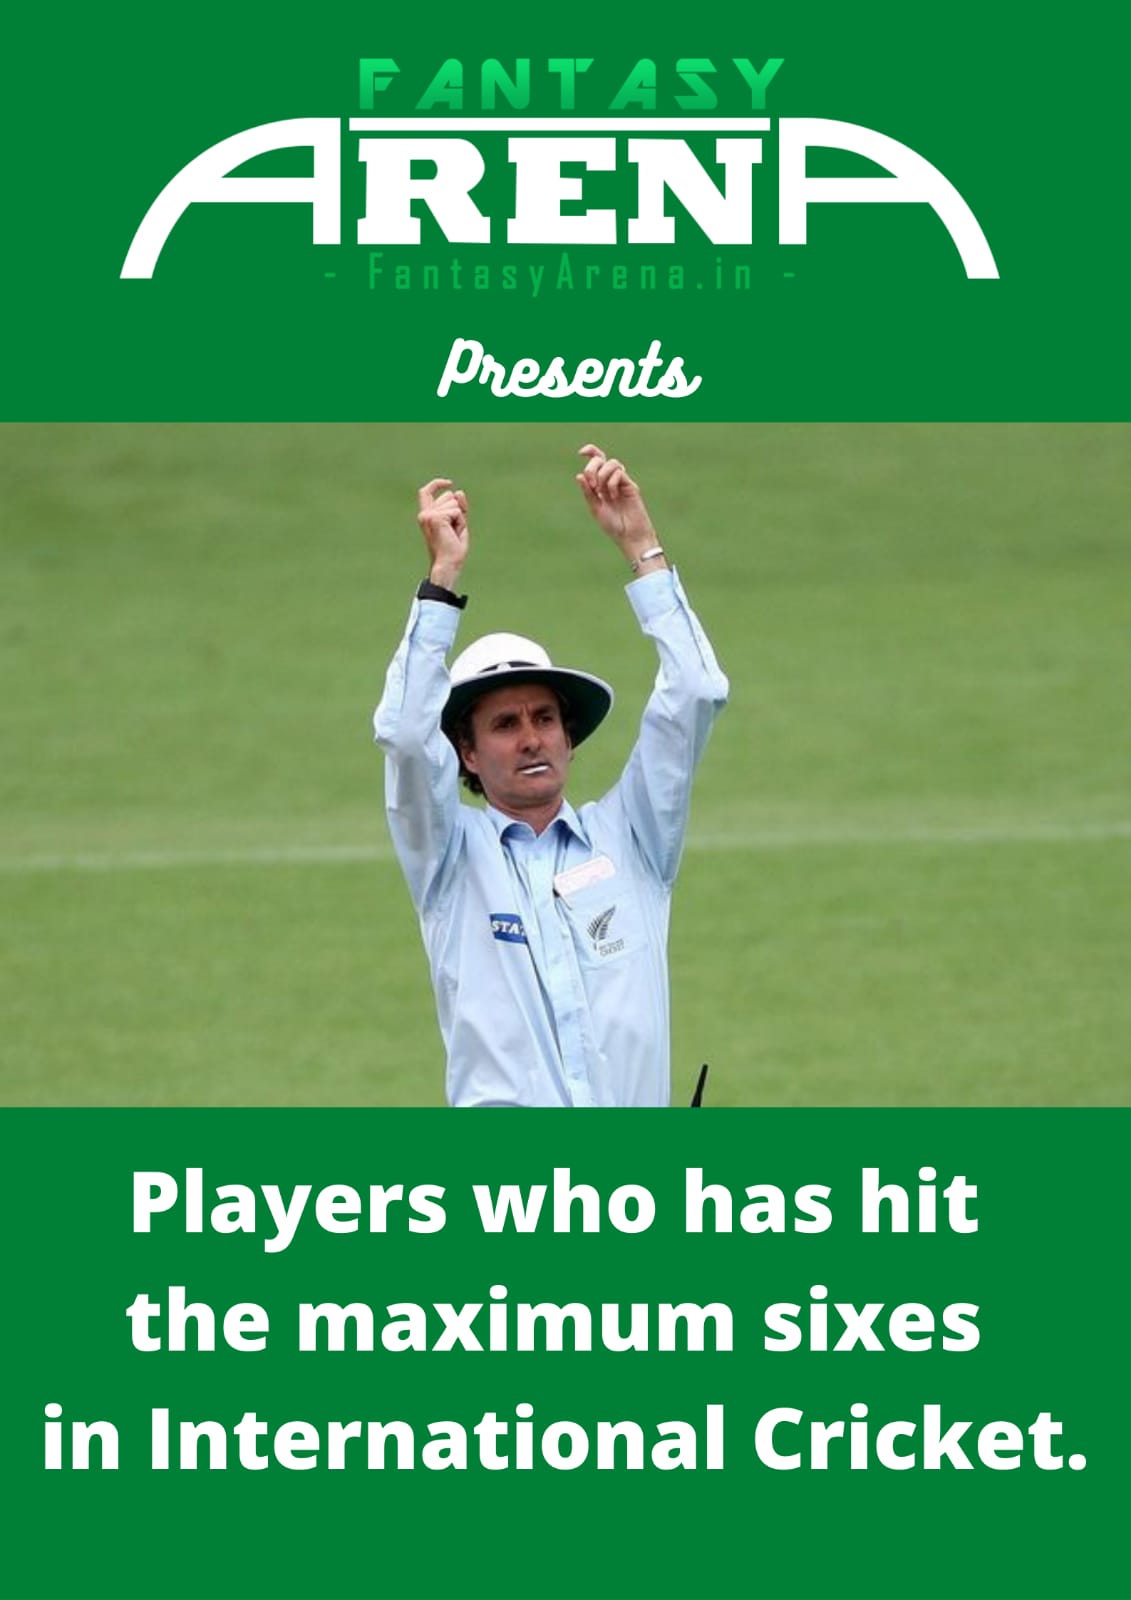 Players who hit the most sixes in international cricket.